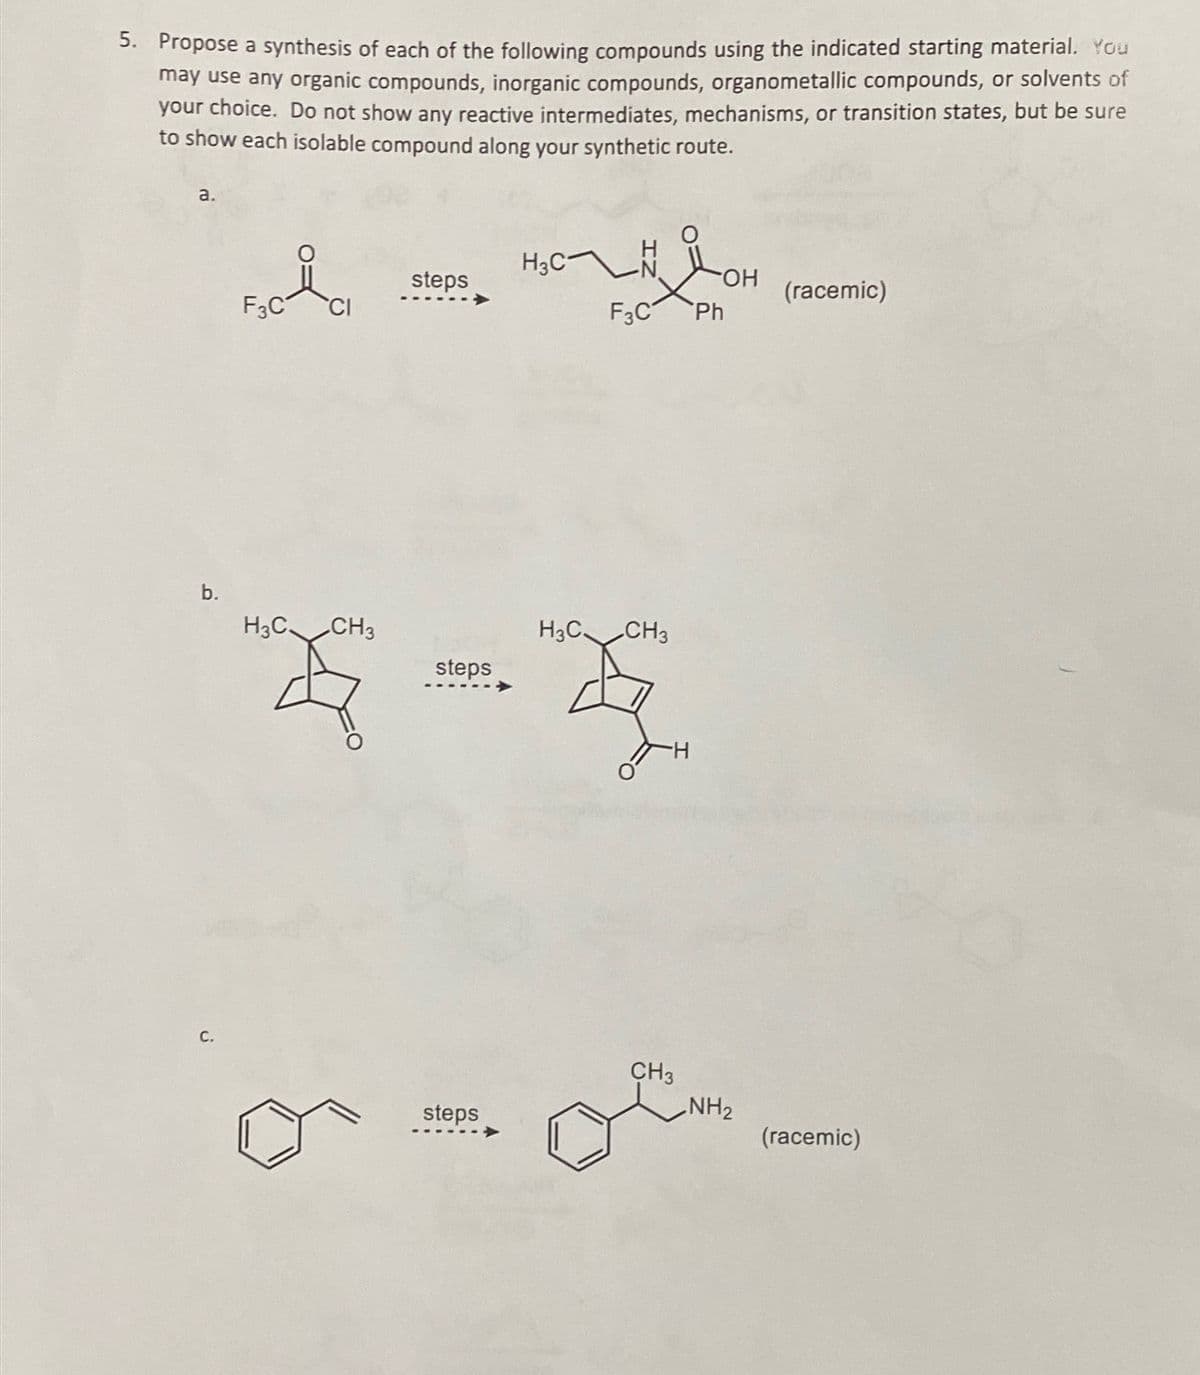 5. Propose a synthesis of each of the following compounds using the indicated starting material. You
may use any organic compounds, inorganic compounds, organometallic compounds, or solvents of
your choice. Do not show any reactive intermediates, mechanisms, or transition states, but be sure
to show each isolable compound along your synthetic route.
a.
H3C
steps
гумон
OH
(racemic)
F3C
CI
F3C Ph
b.
H3C. CH3
H3C CH3
steps
C.
steps
CH3
NH2
(racemic)